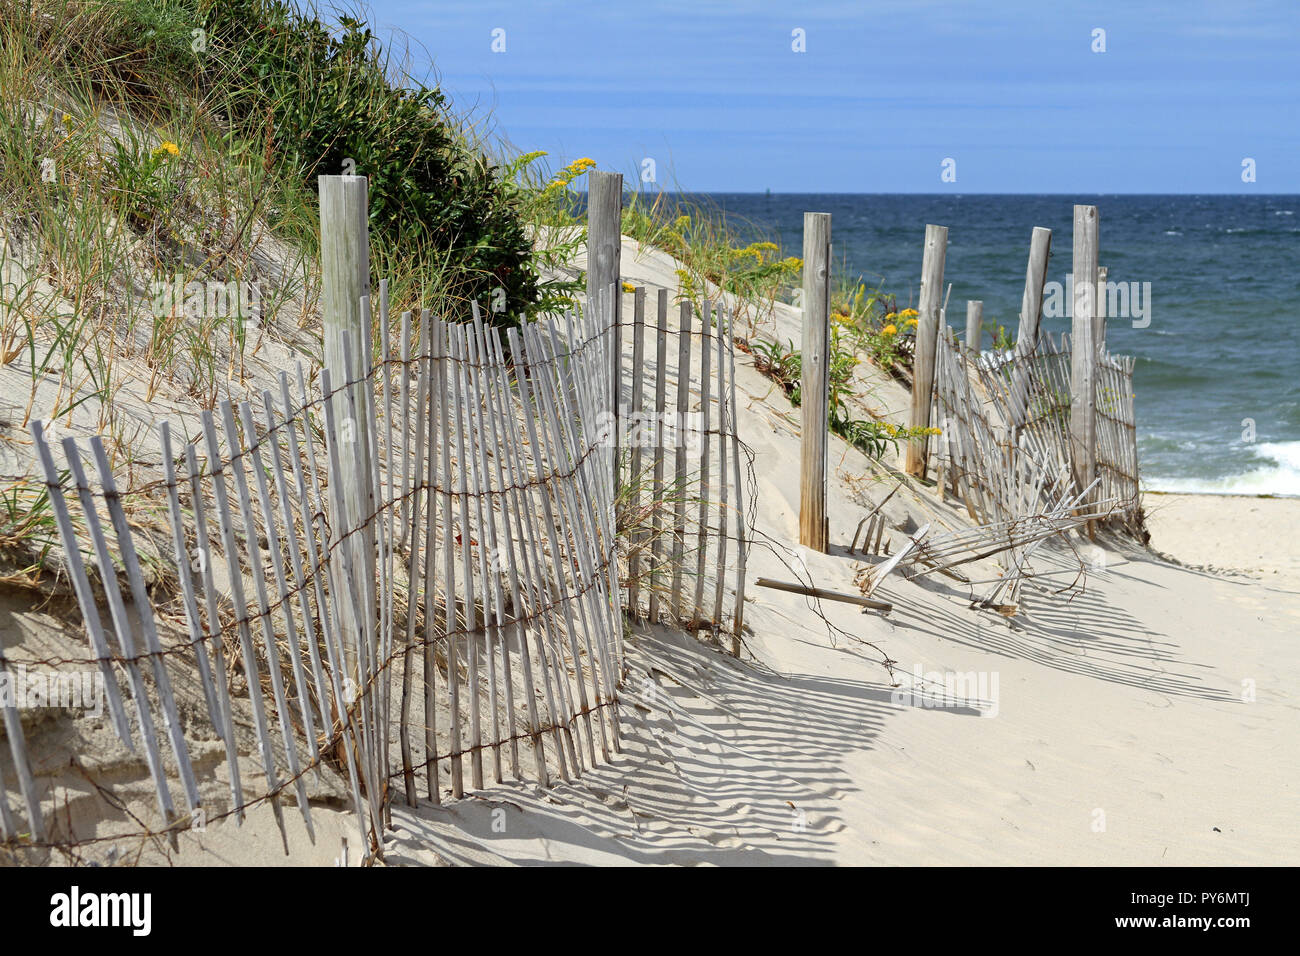 A rickety wooden fence protecting dunes along a sandy path that marks the entrance to Cold Storage Beach on Cape Cod in East Dennis, Massachusetts Stock Photo